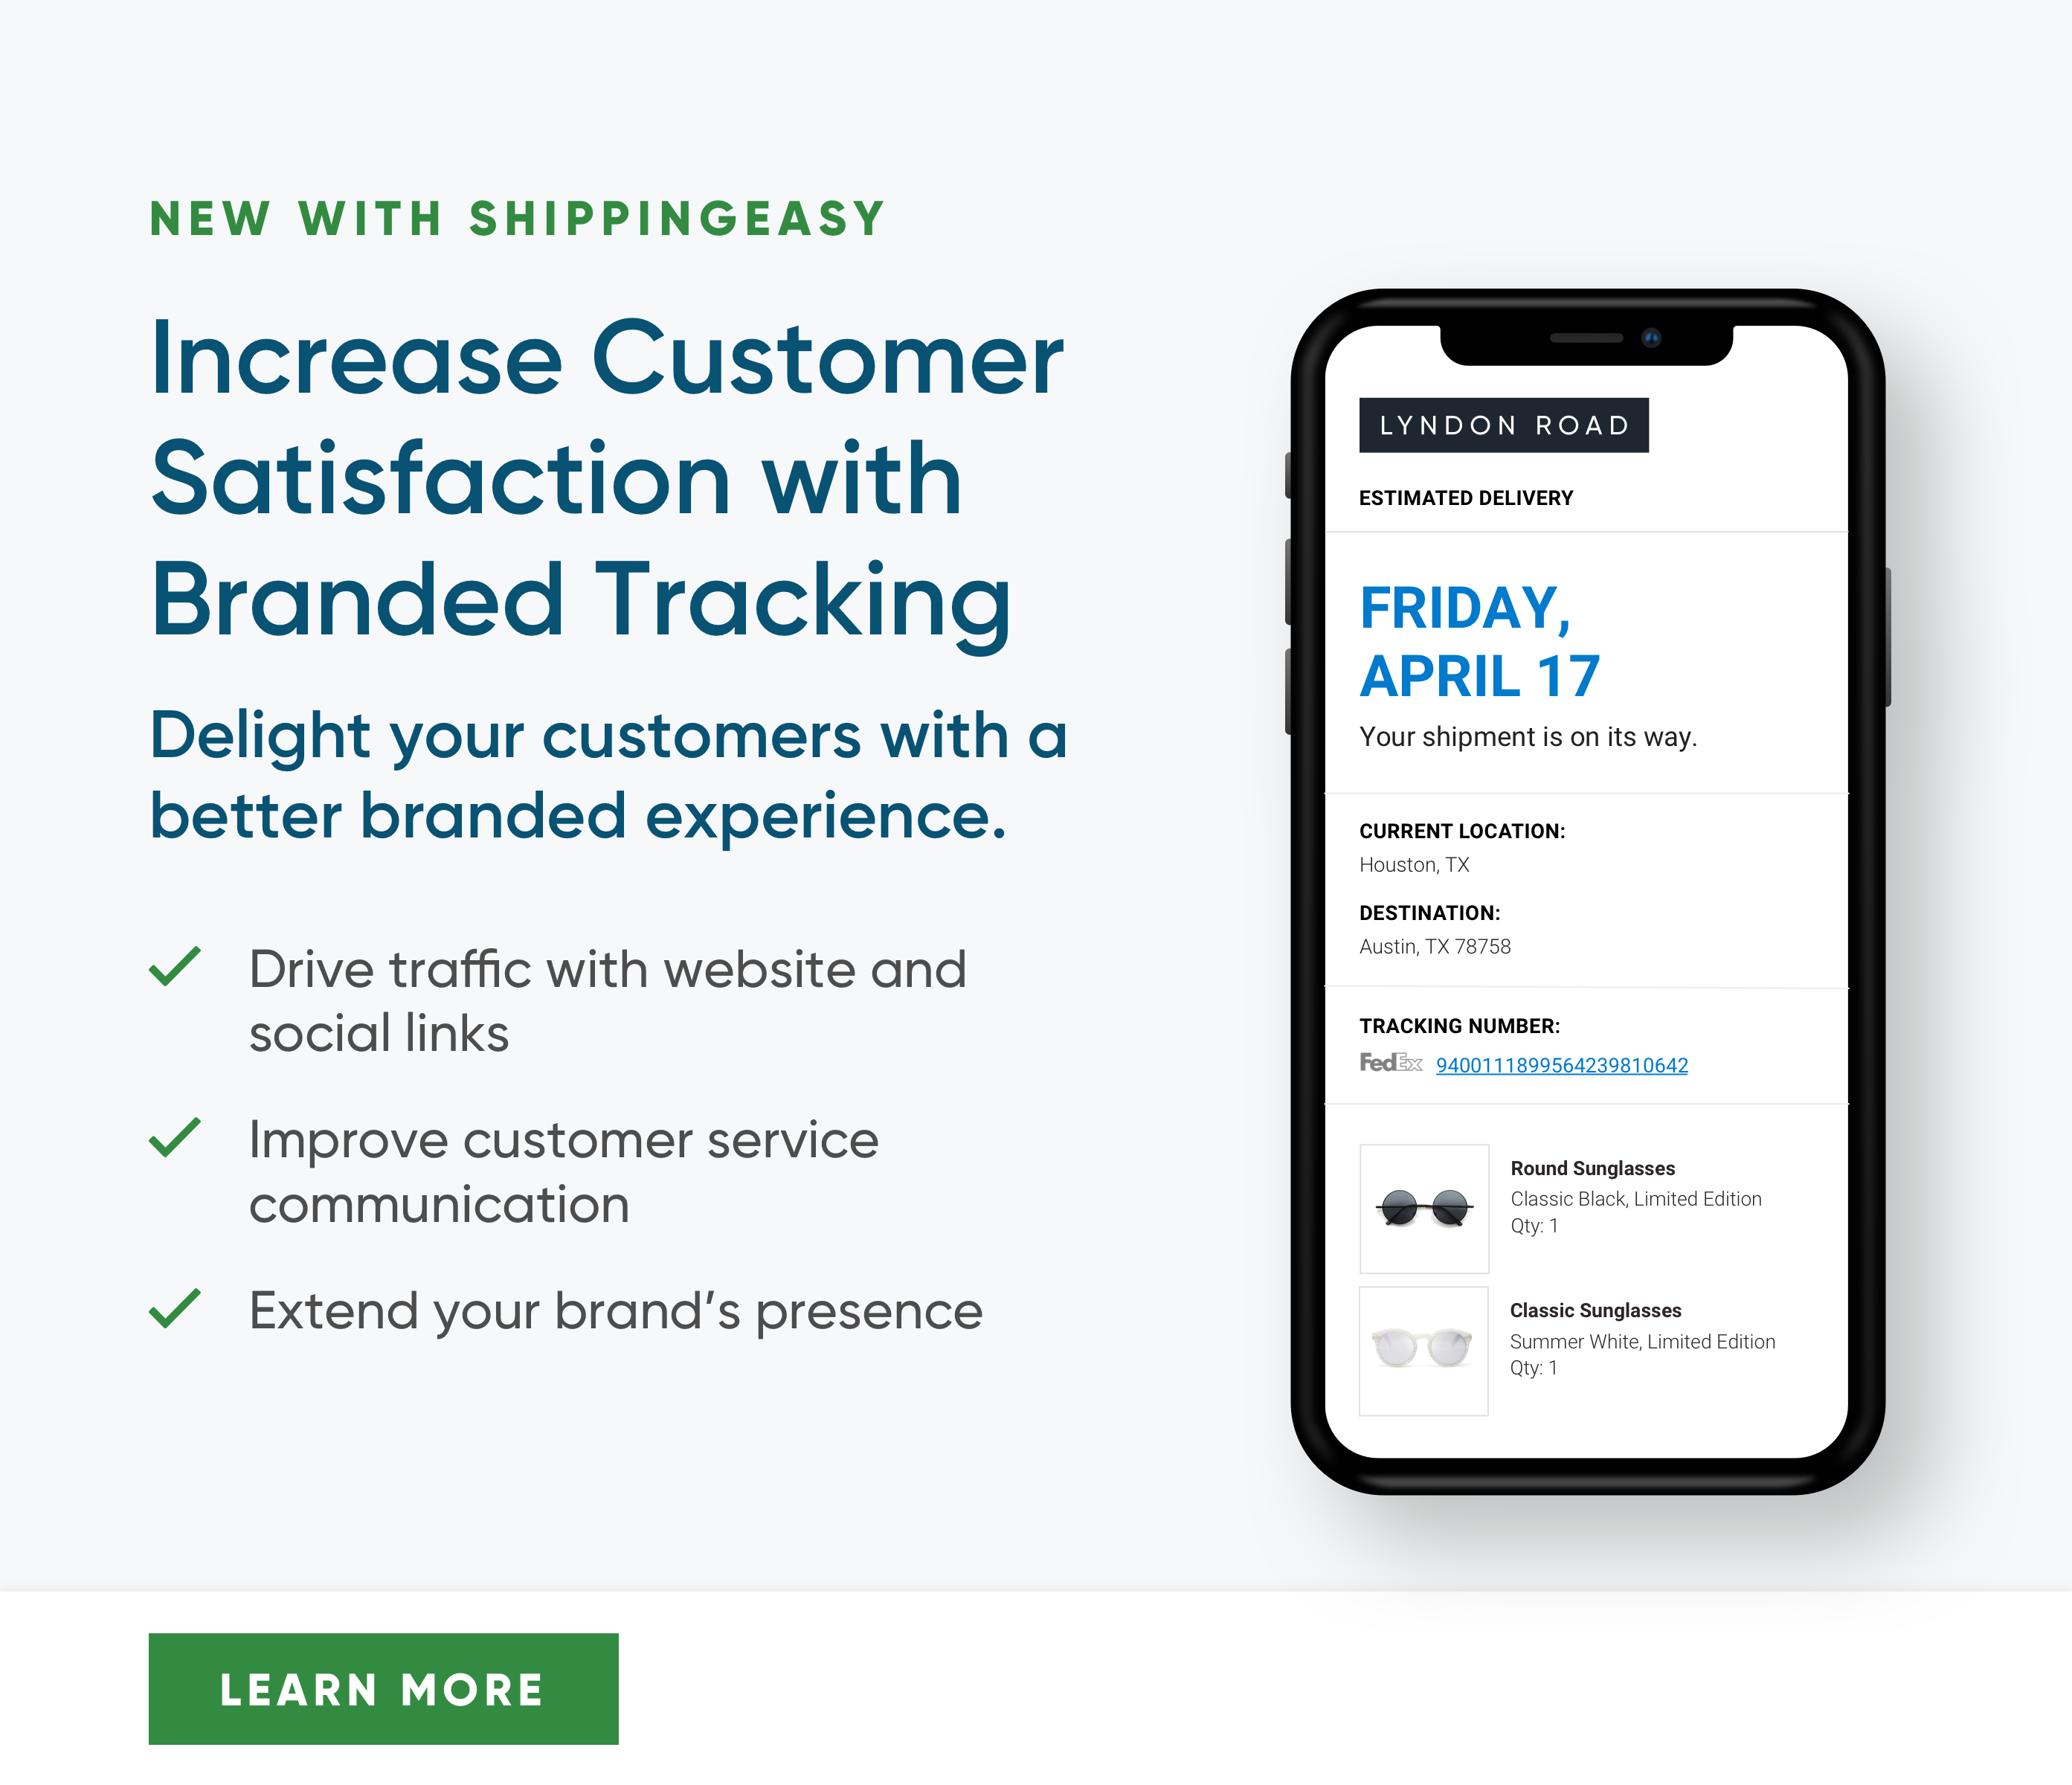 Increase Customer Satisfaction with Branded Tracking